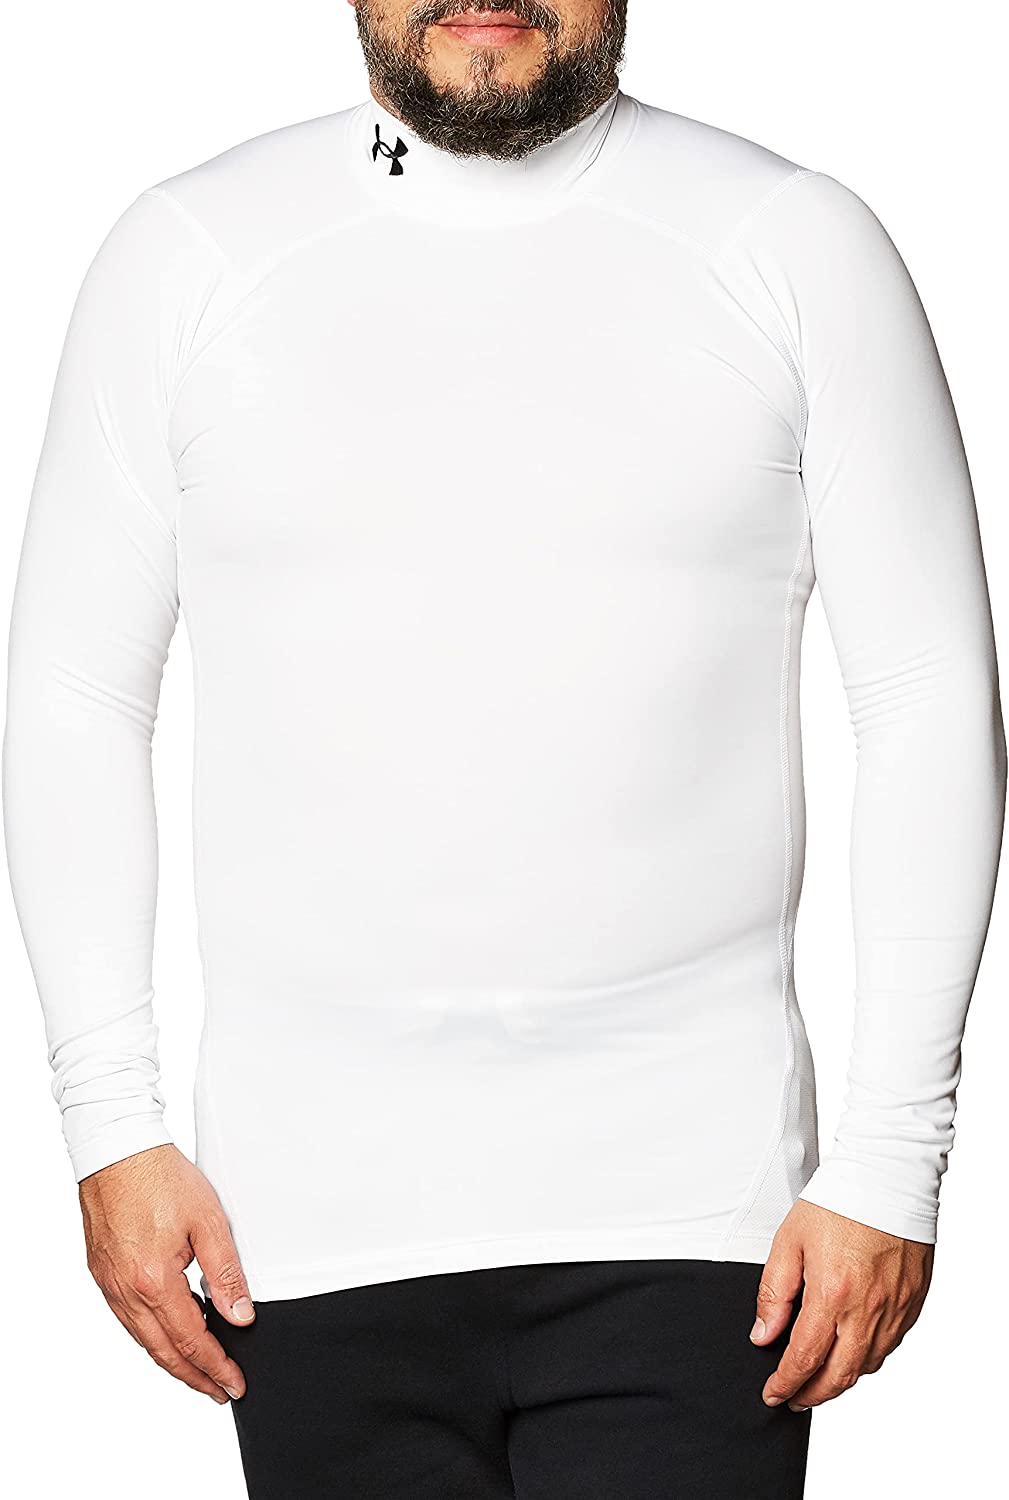 Under Armour Men's ColdGear Compression Mock - 1366072 - FREE SHIPPING -  Simpson Advanced Chiropractic & Medical Center